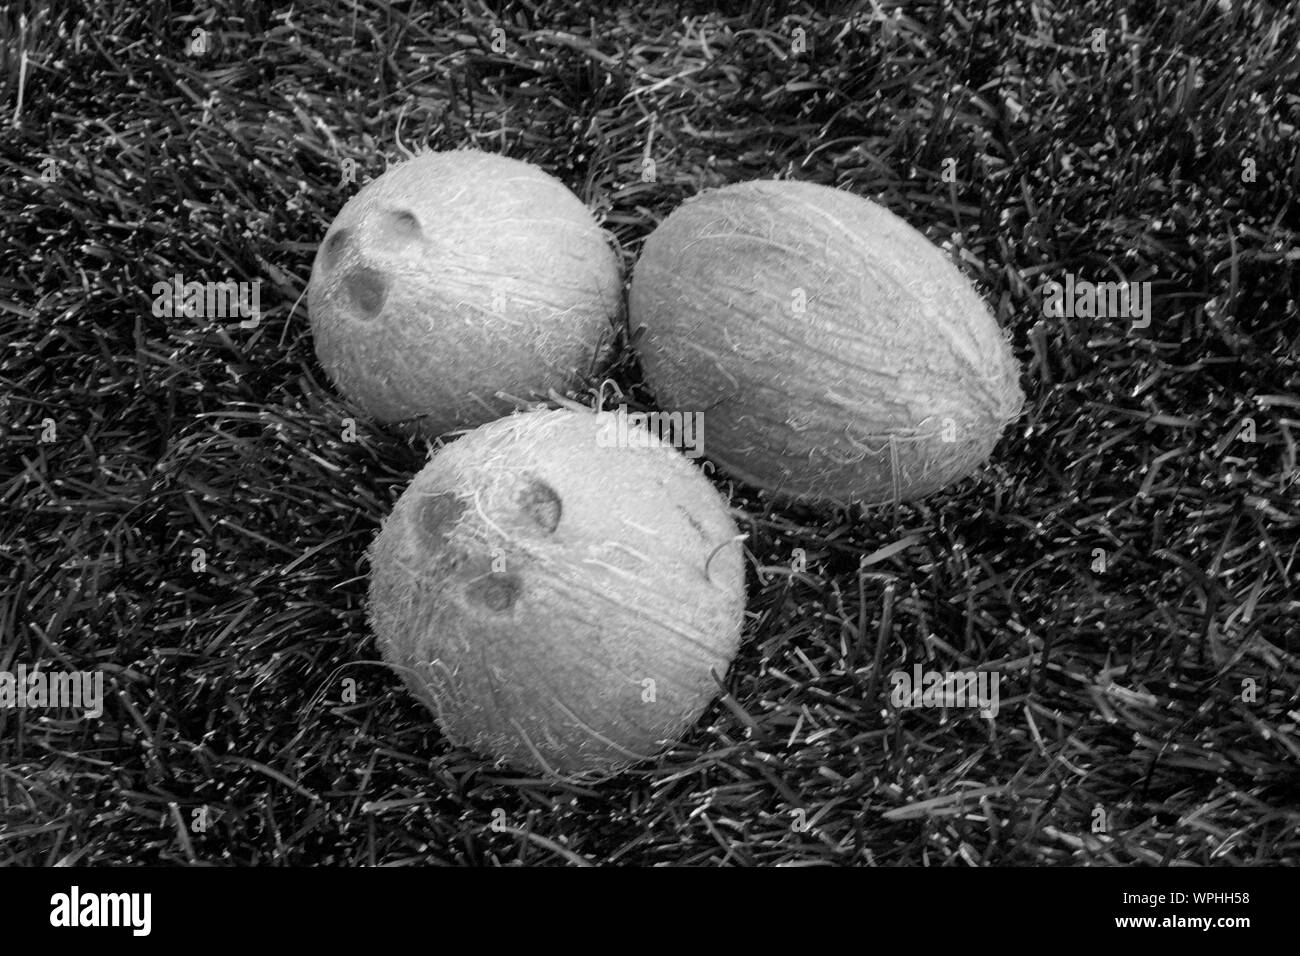 A black and white photo of  whole coconuts  on the  grass. Vegetarian and healthy food. Nutrition and diet background. Cosmetic industry. Stock Photo